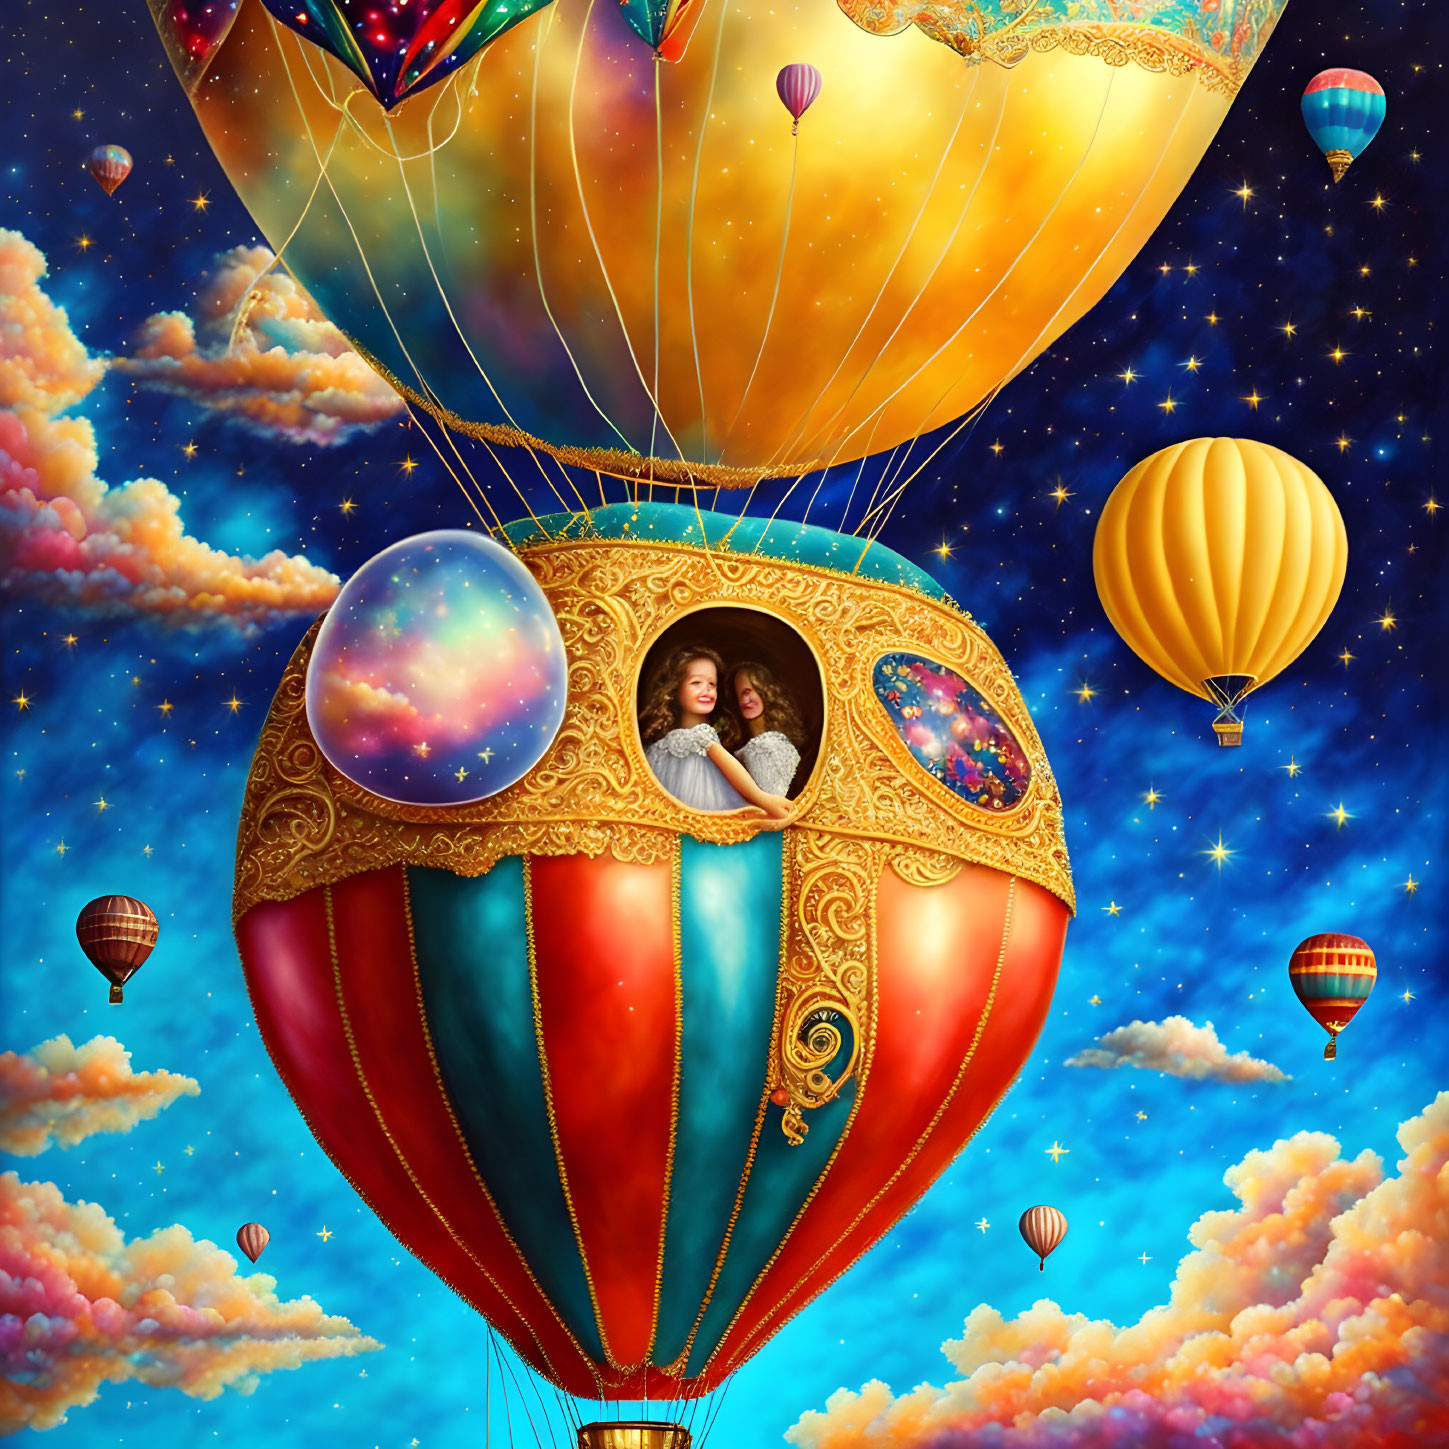 Colorful digital artwork: Person in ornate hot air balloon among whimsical clouds